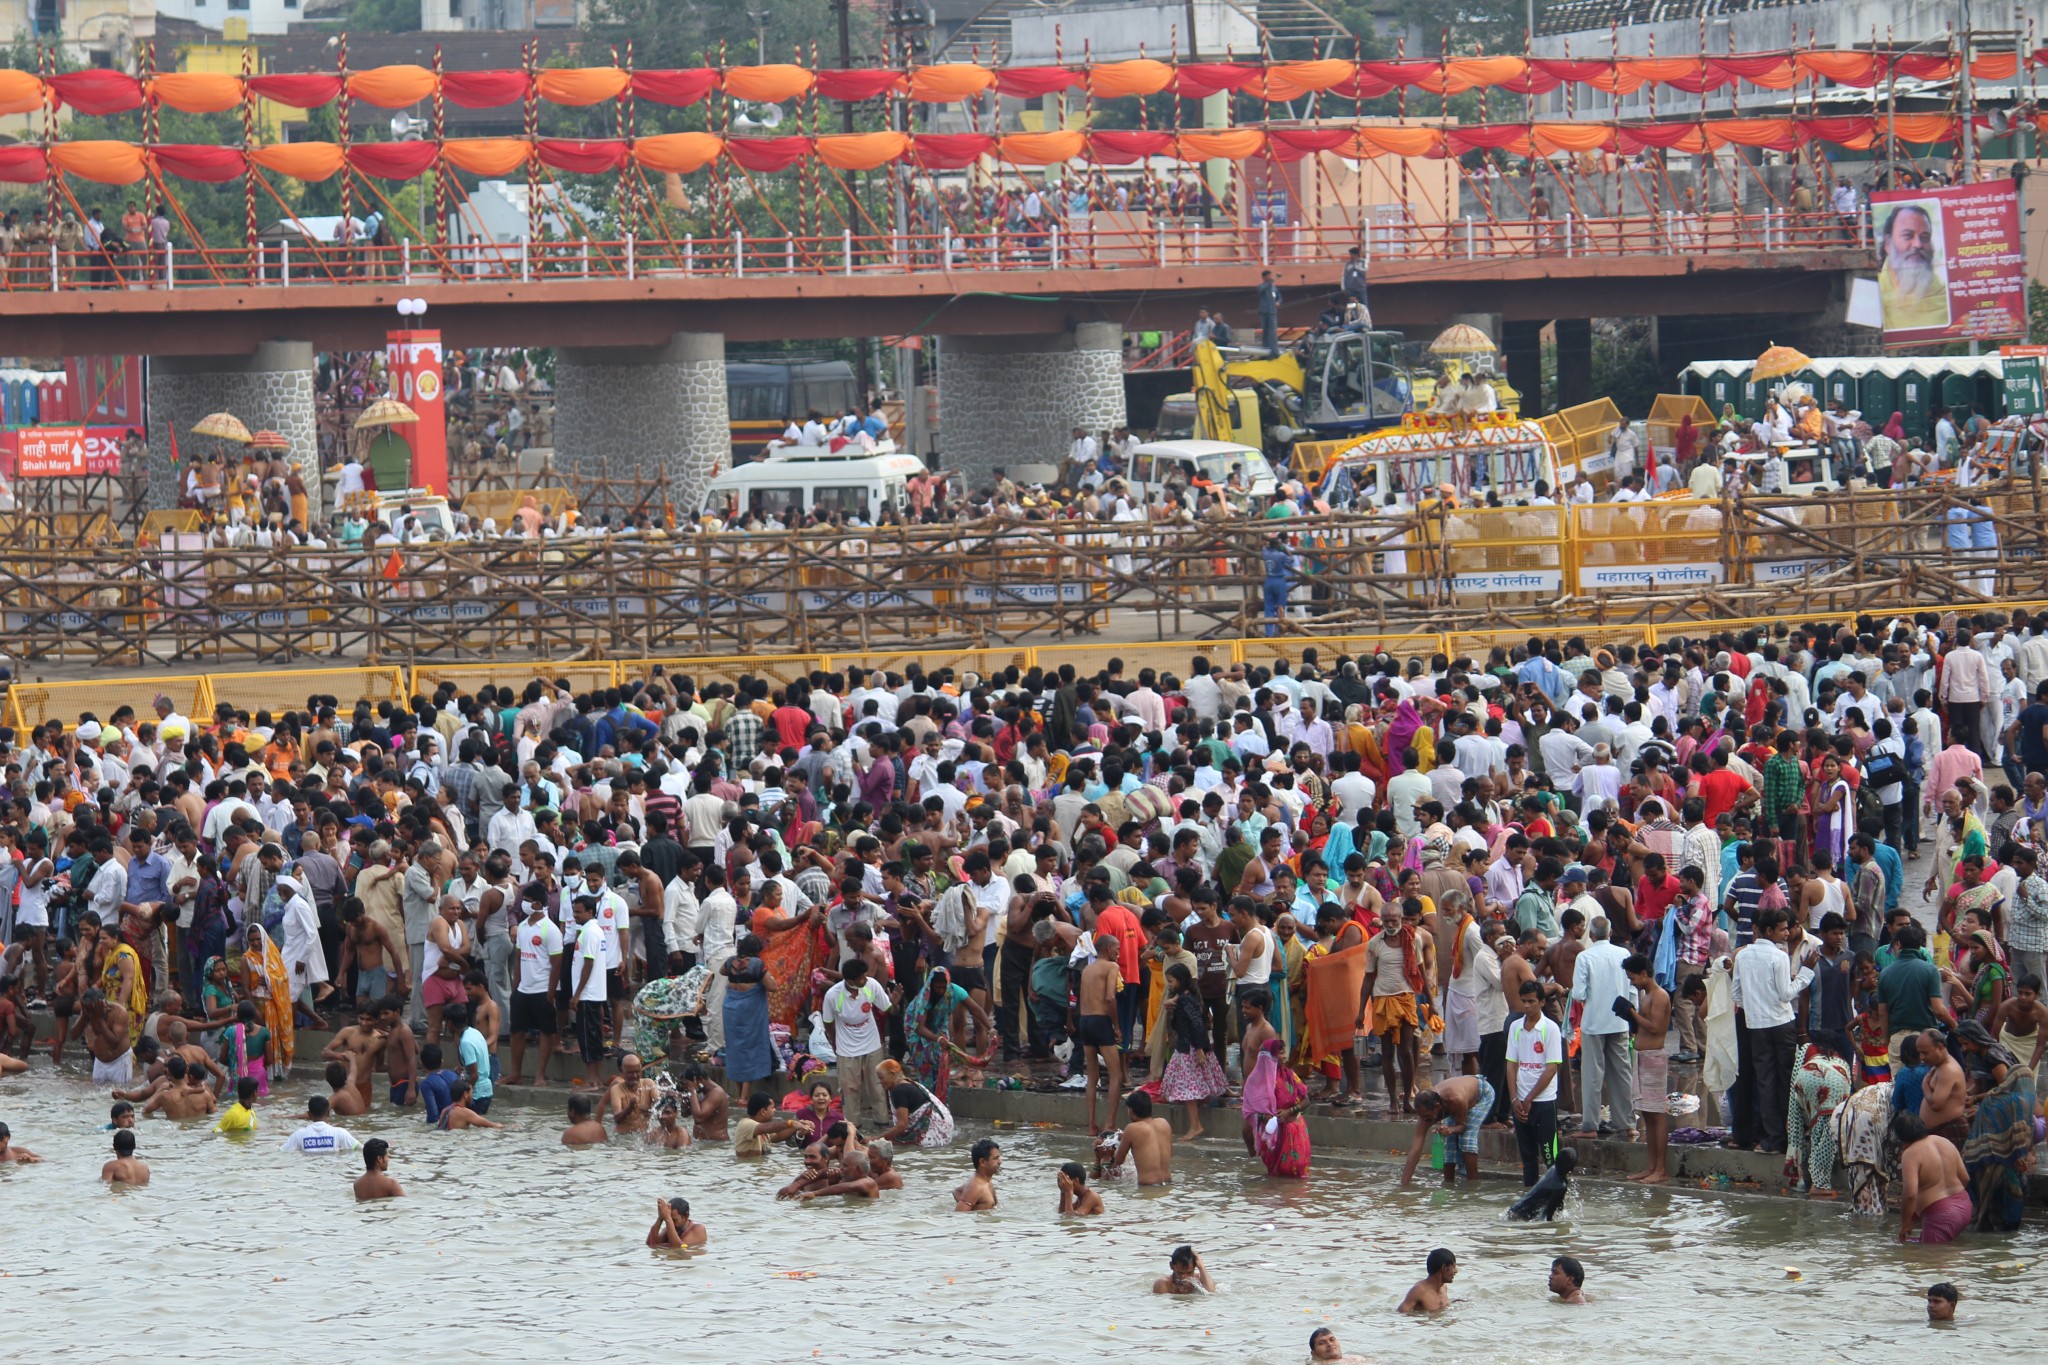 The shahi snan area and procession separated by barricades at Ramkund, Nashik